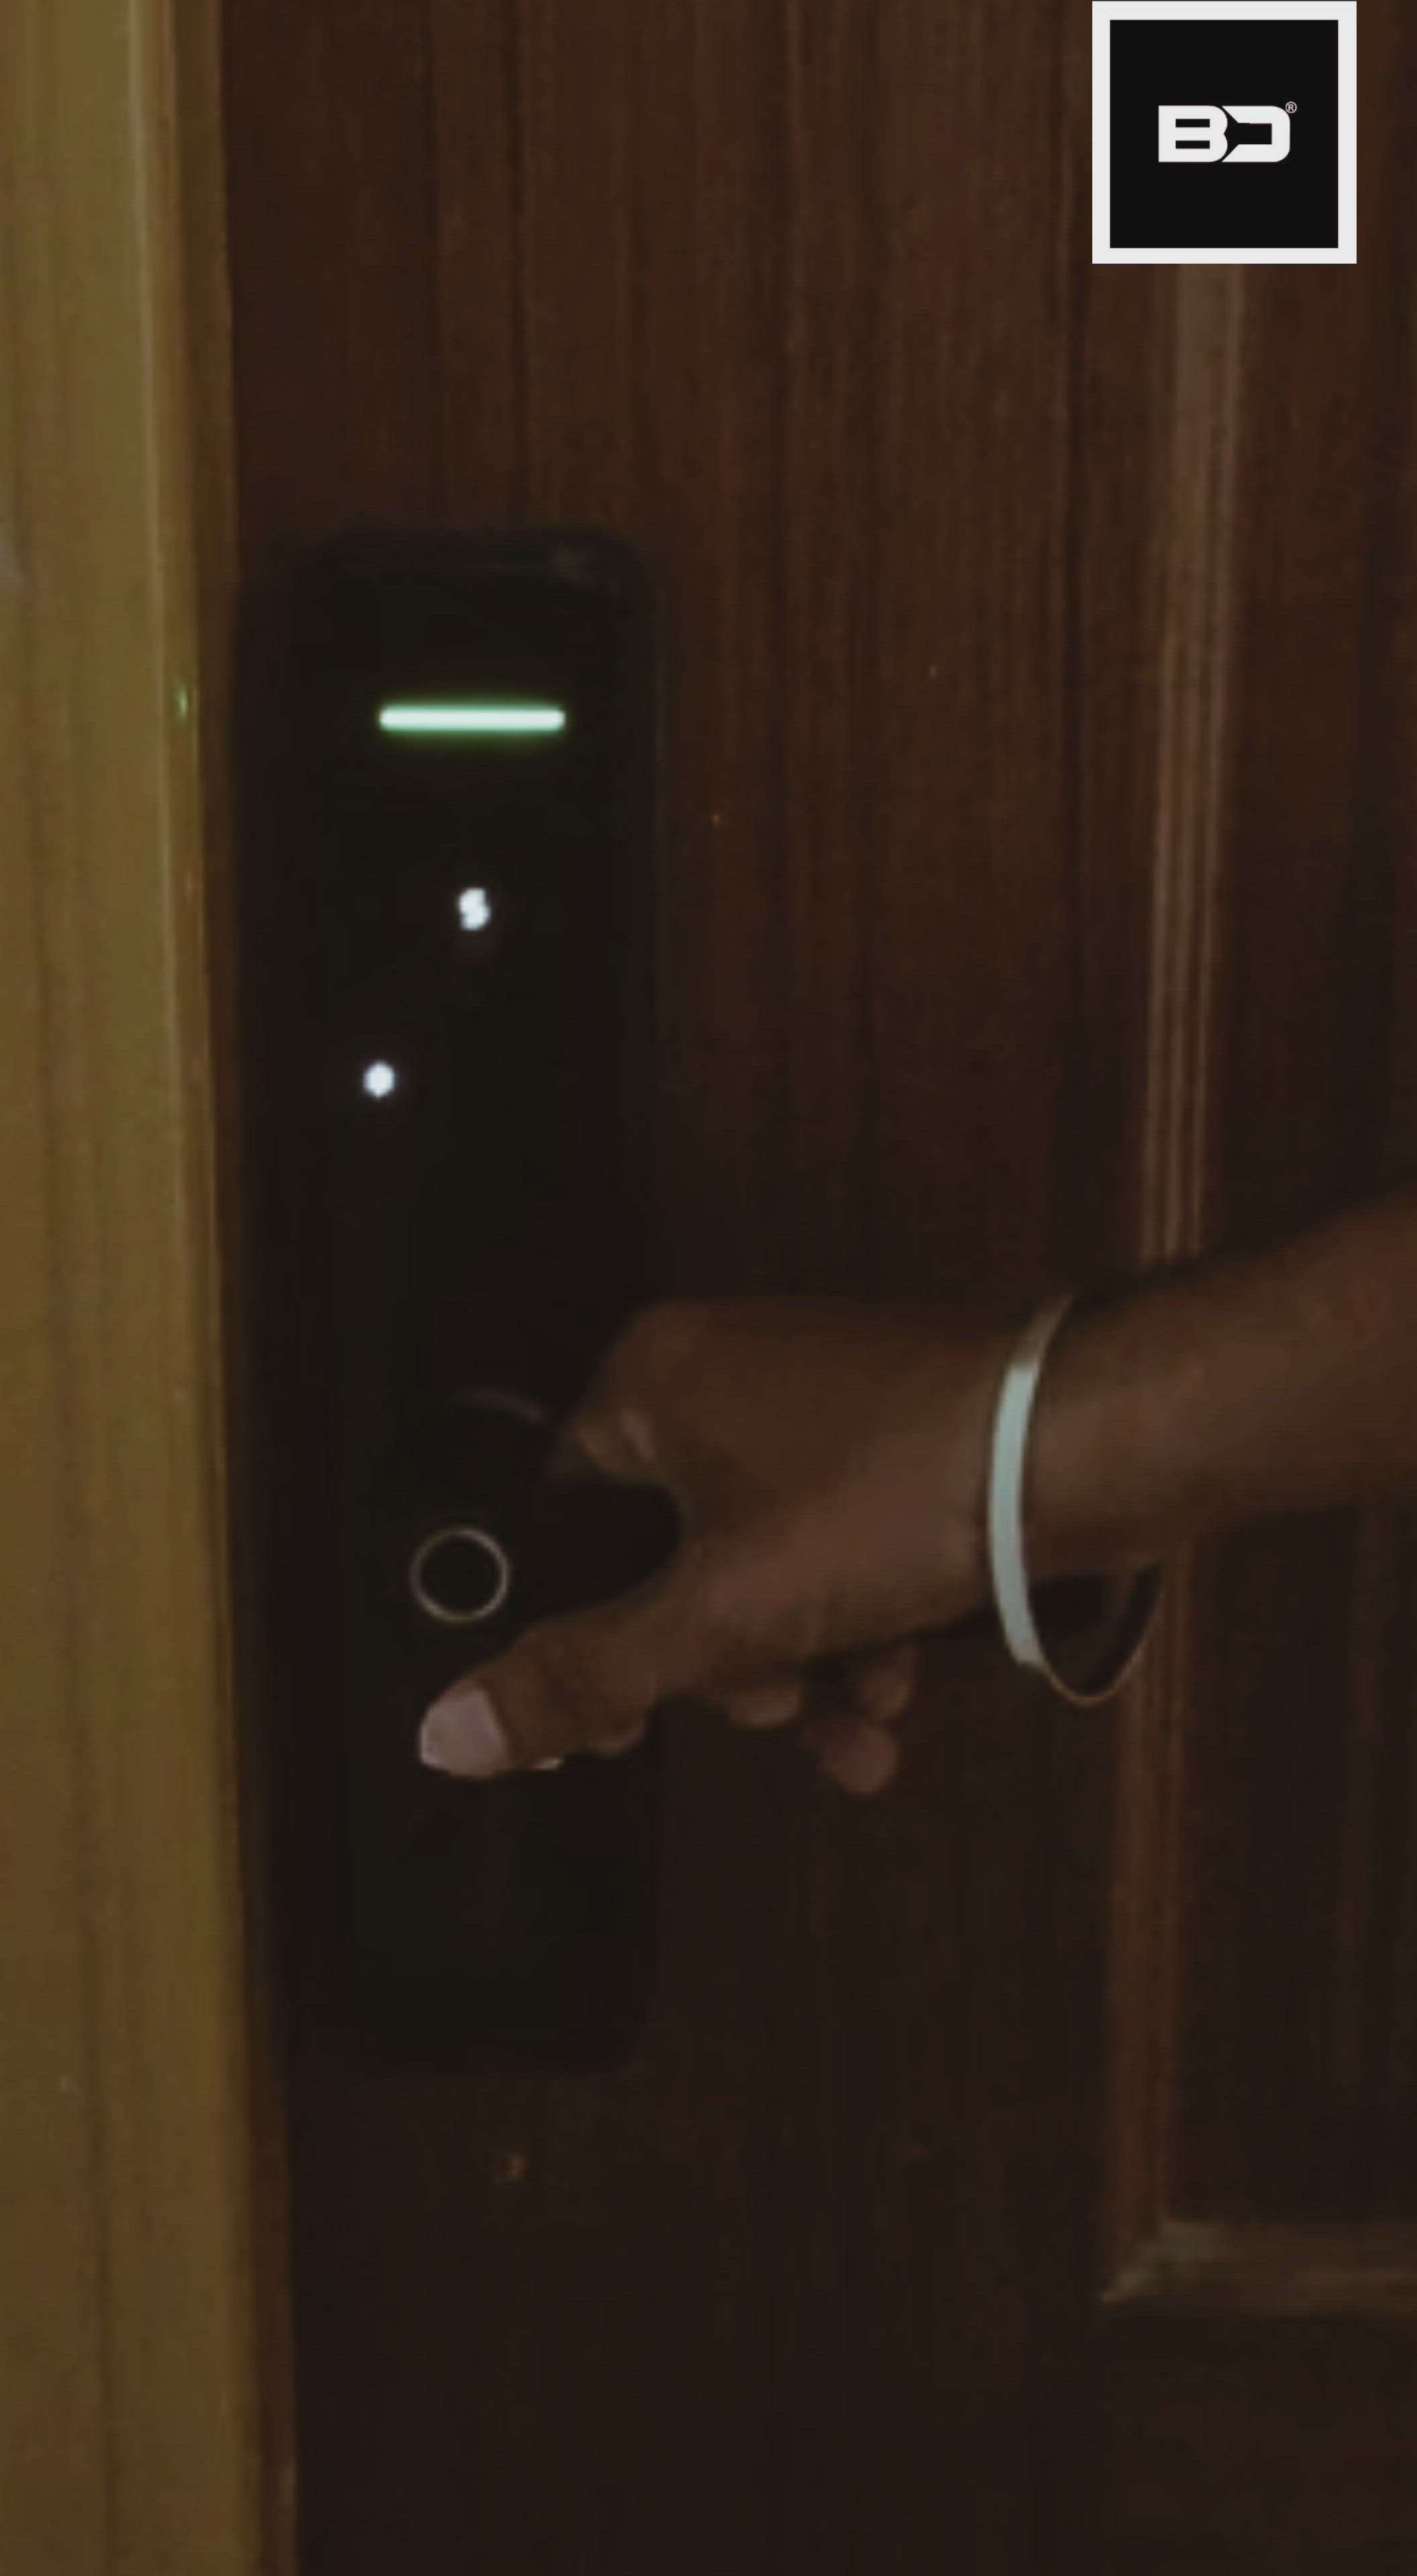 BD Home Automation 
 #smartdoorlock  #HomeAutomation